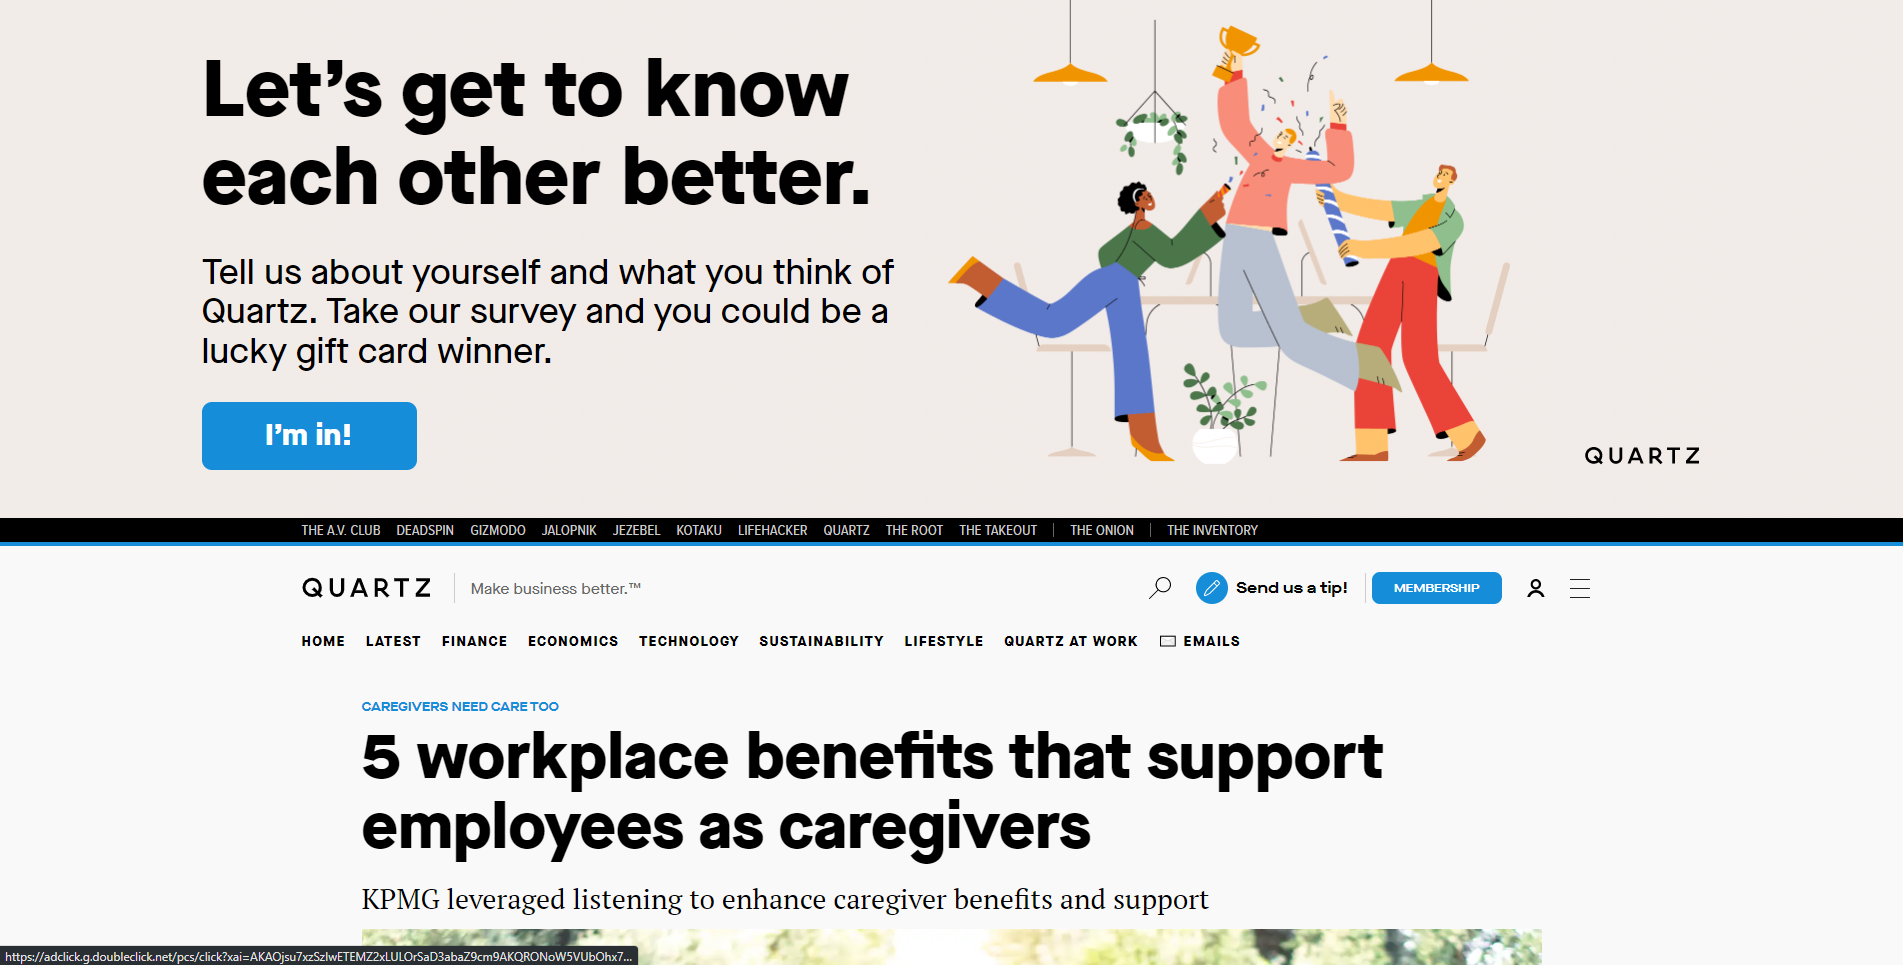 5 workplace benefits that support employees as caregivers